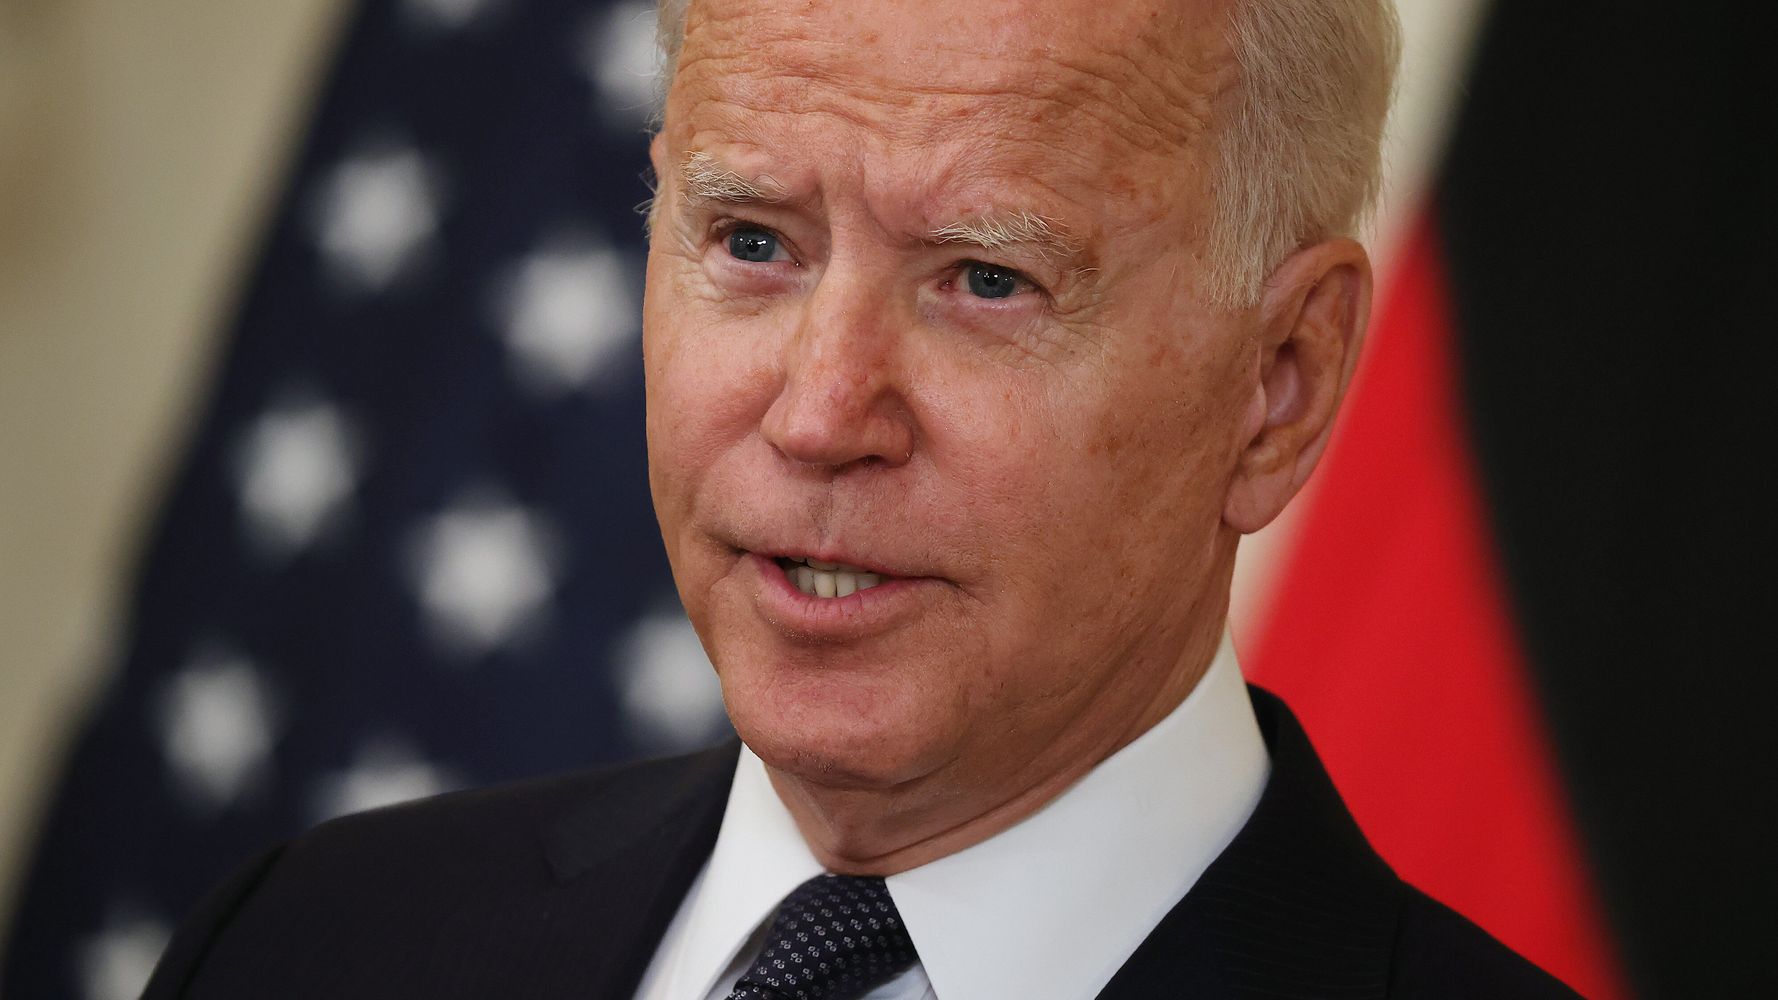 Biden: Social Media Platforms Are 'Killing People' With Misinformation About Vaccines